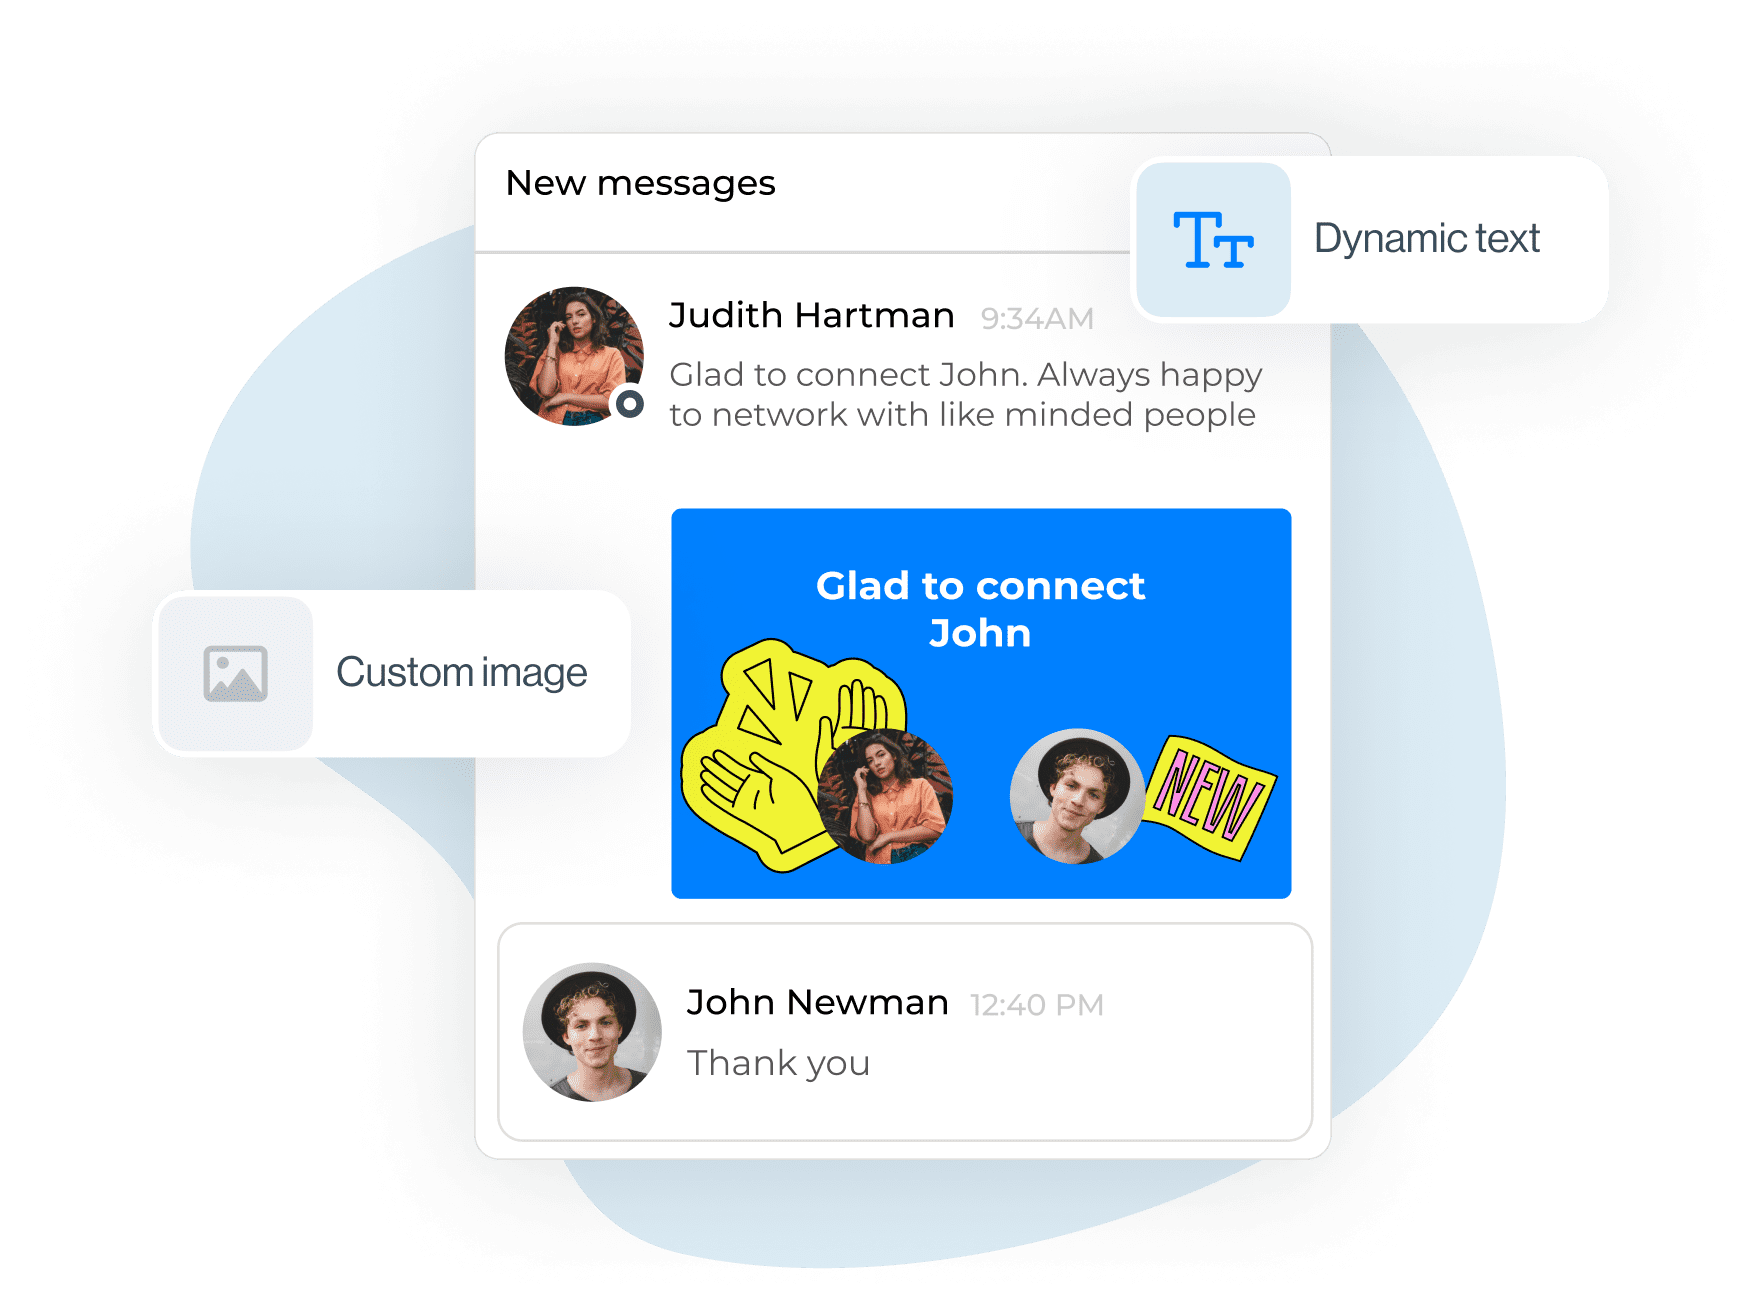 Image of chat with personalized image with user's and the lead's image, Dynamic text and Custom image cards